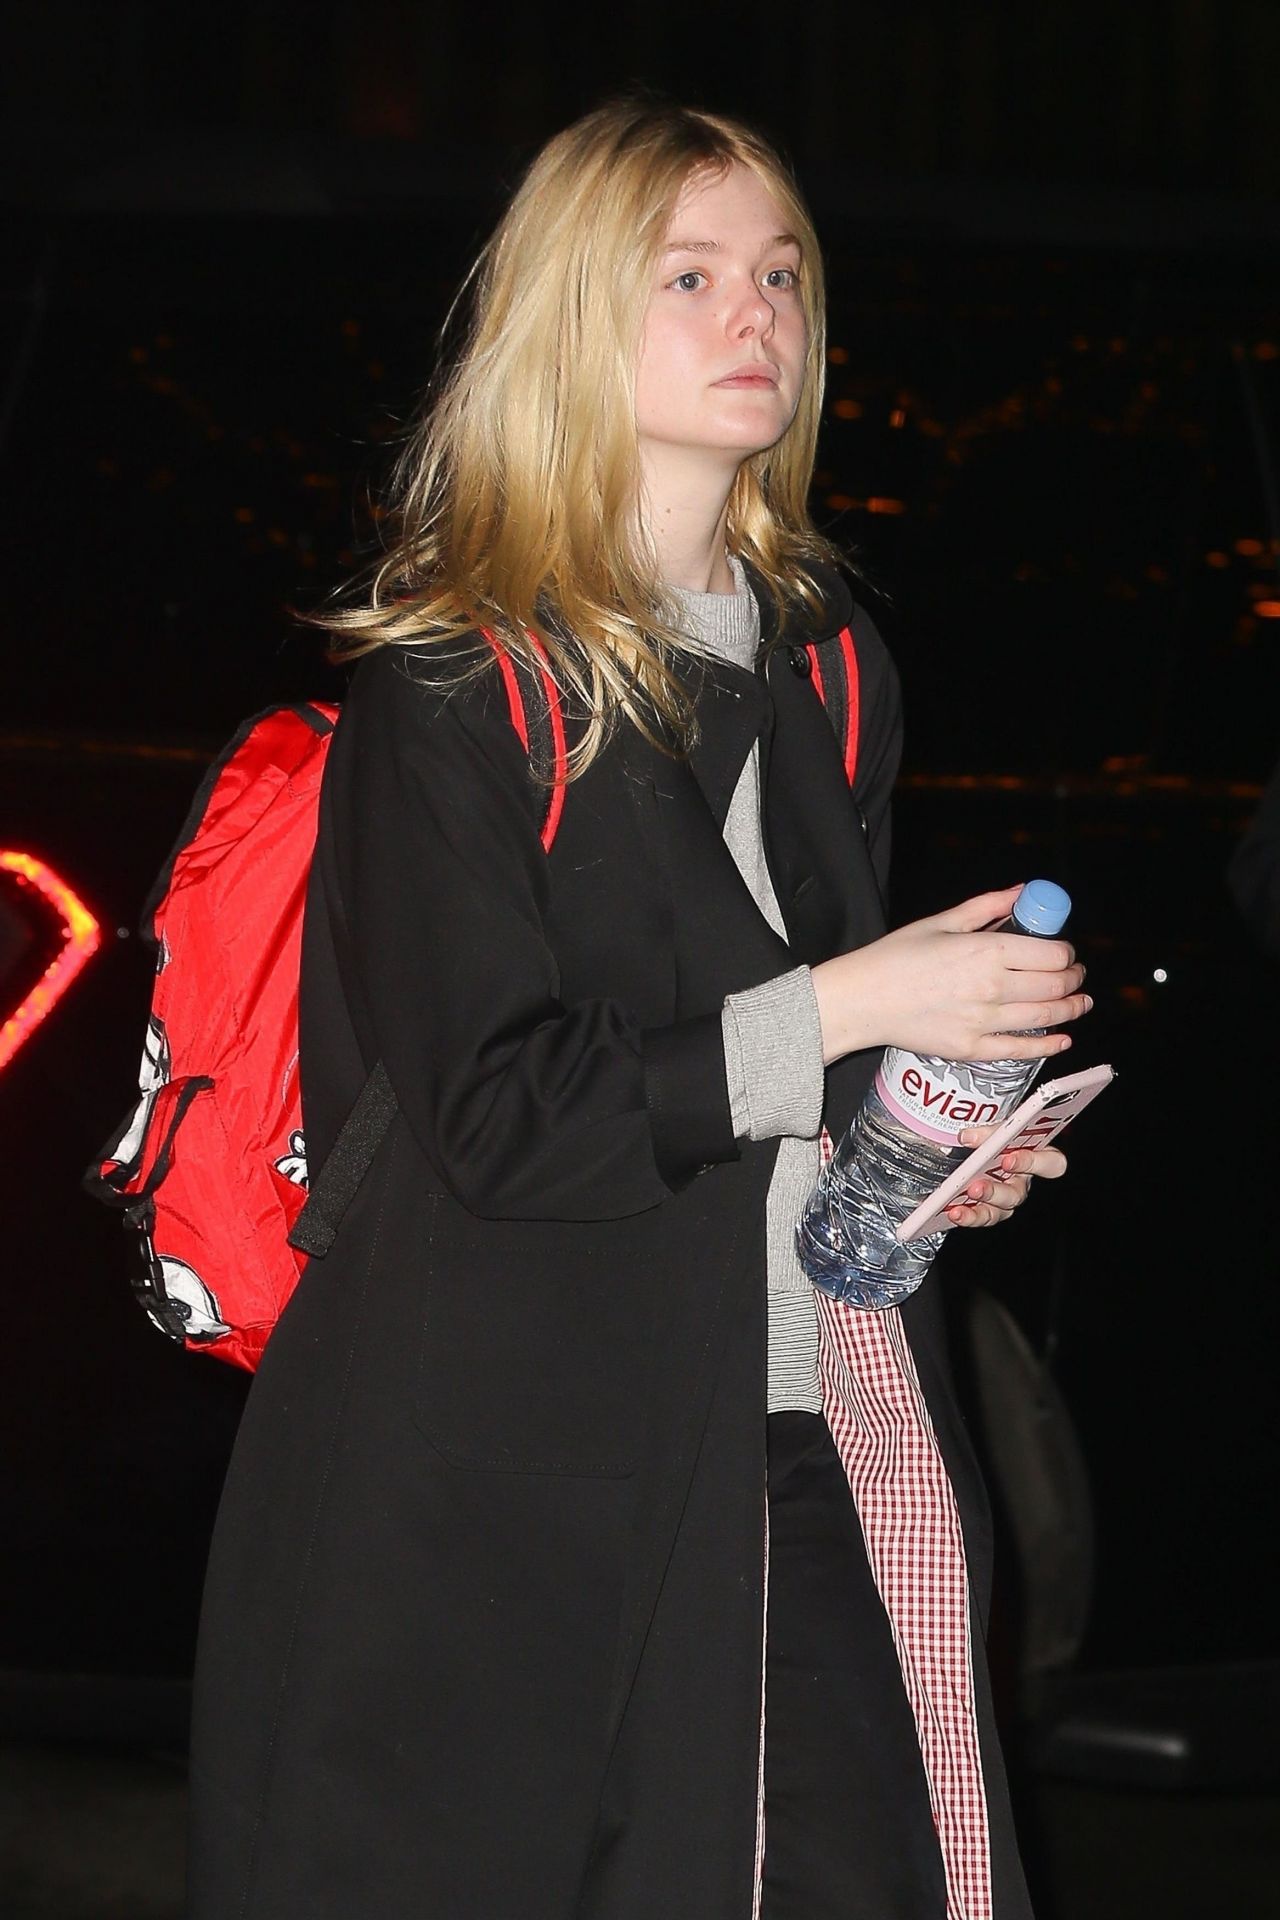 Elle Fanning - Arriving at the Bowery Hotel in NYC 01/08/20191280 x 1920